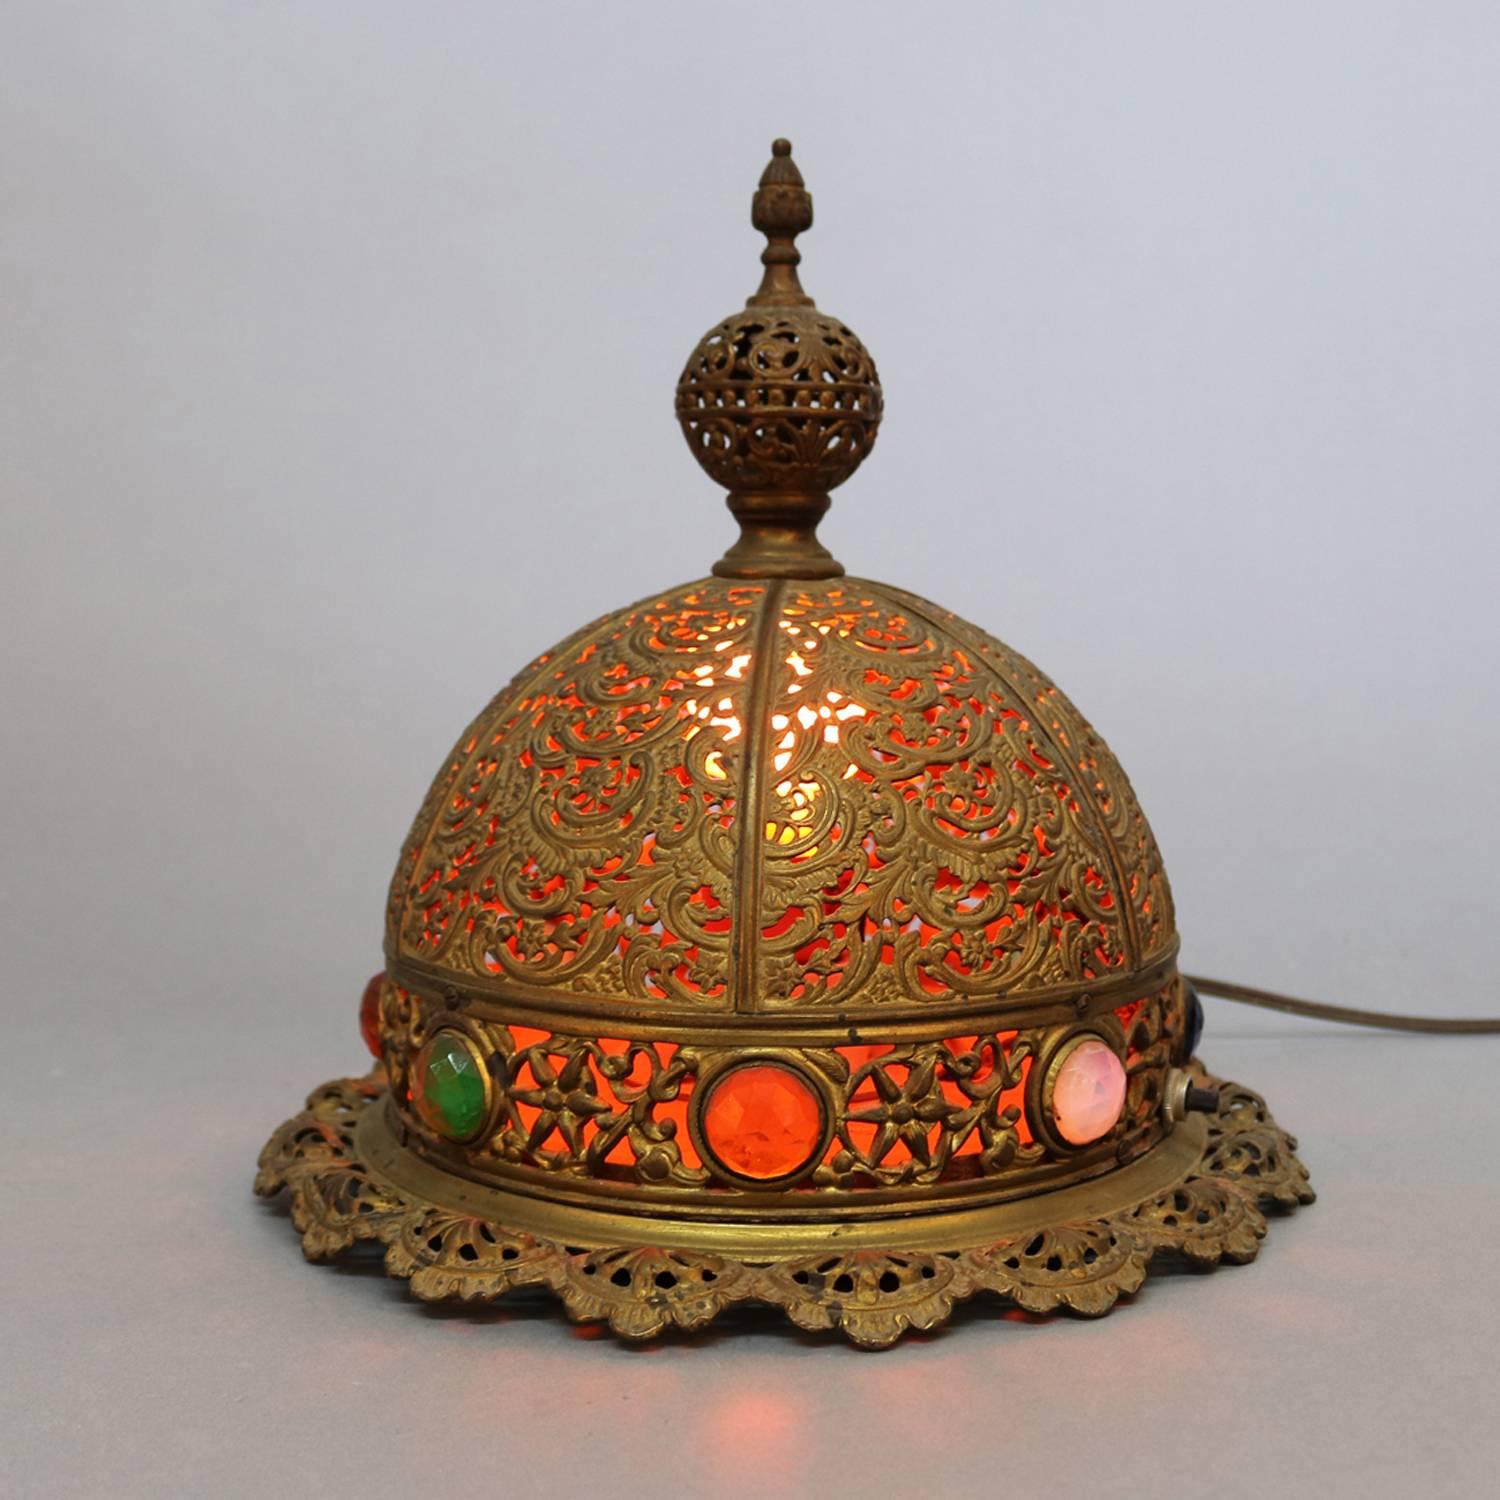 Cast Antique Moorish Jewelled and Reticulated Brass Moroccan Dome Table Lamp